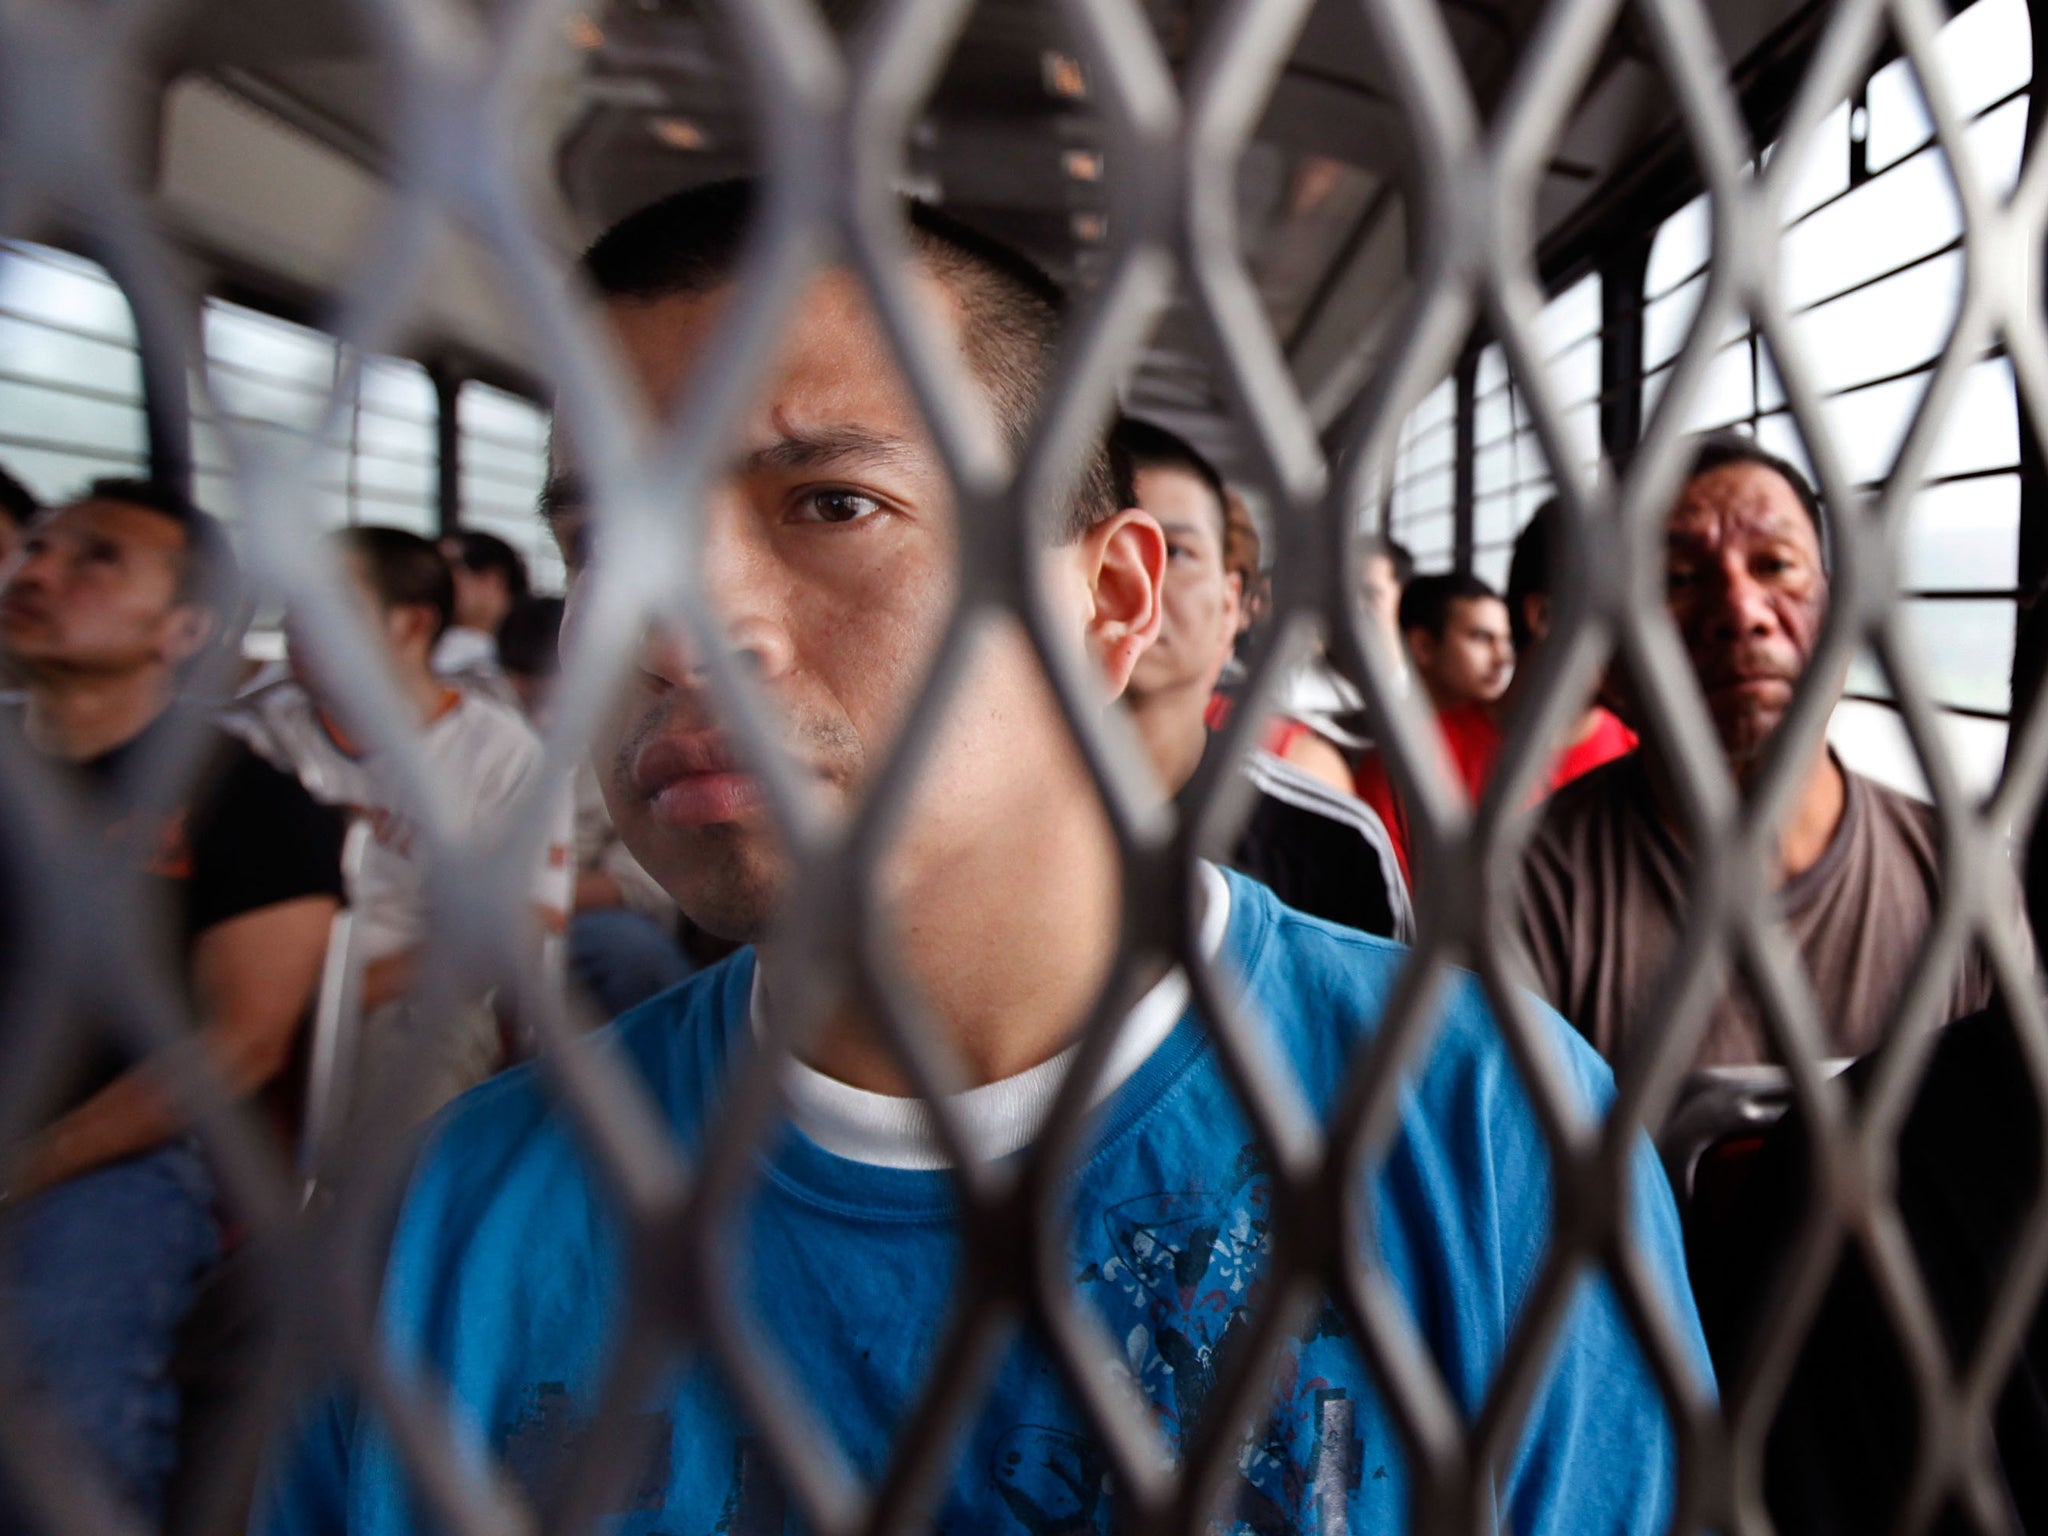 Undocumented immigrants wait to be deported in this stock photo